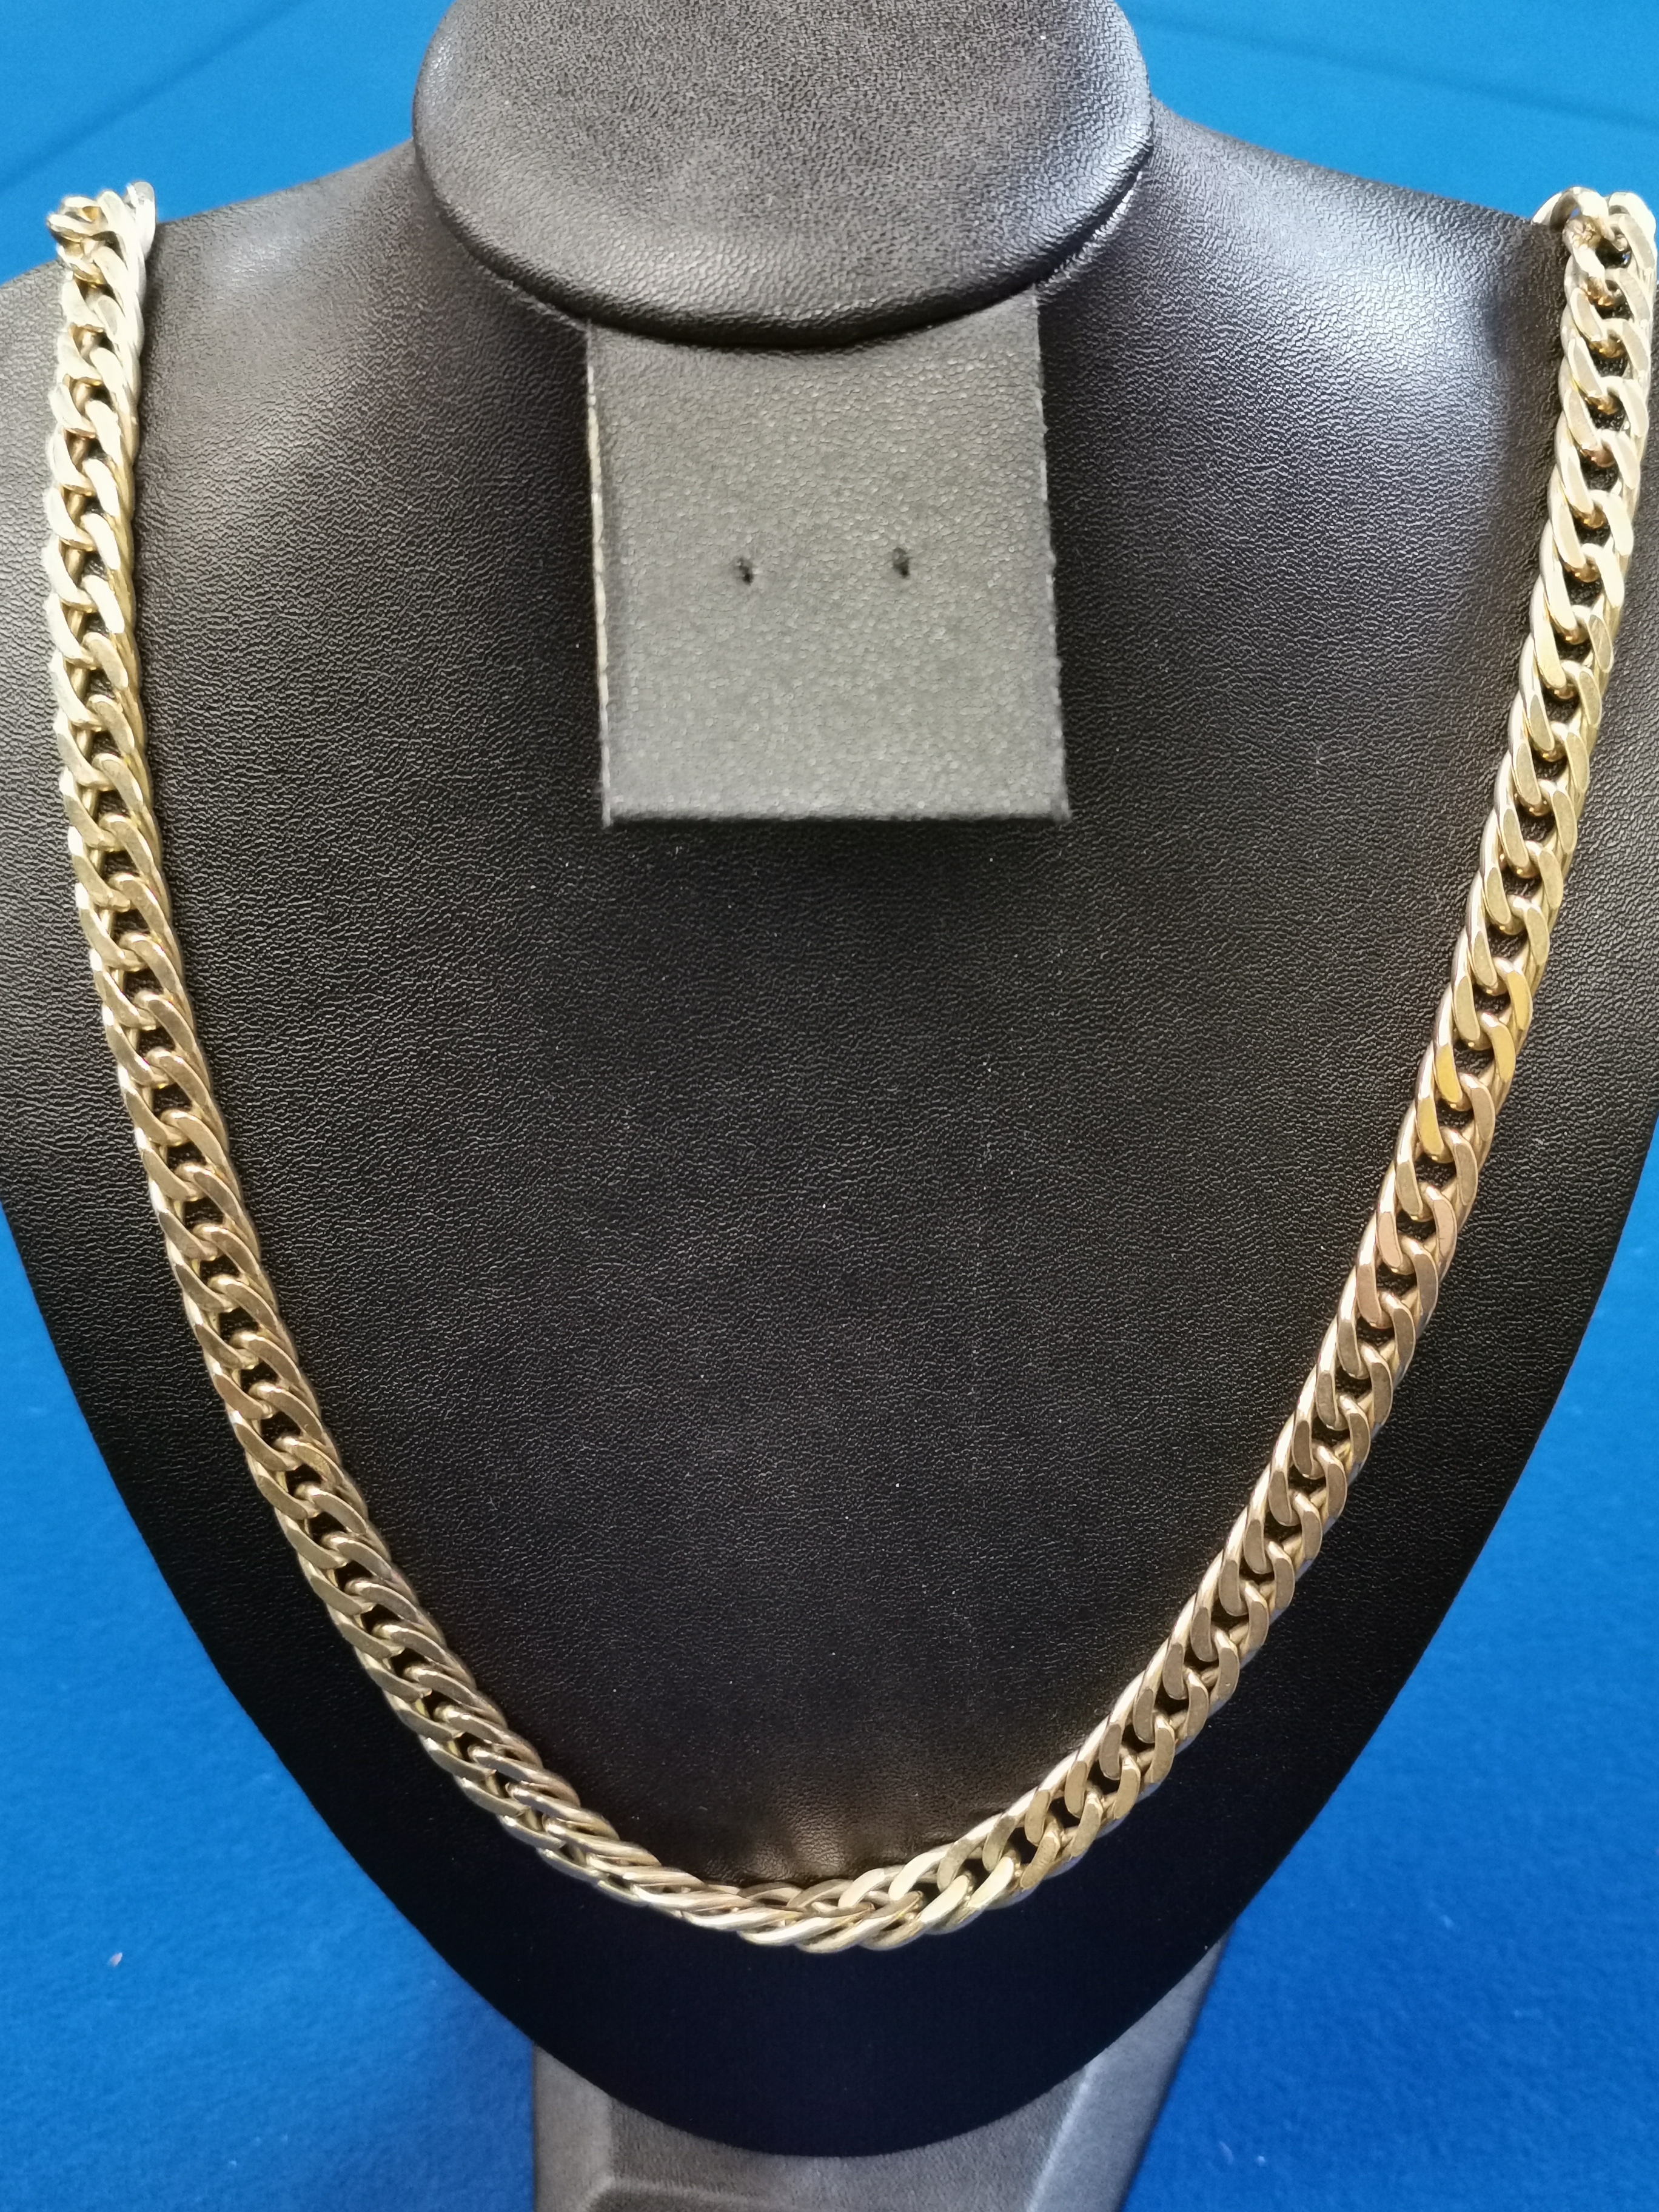 9ct Gold Chain - 94g MARKED 375 - Image 2 of 2